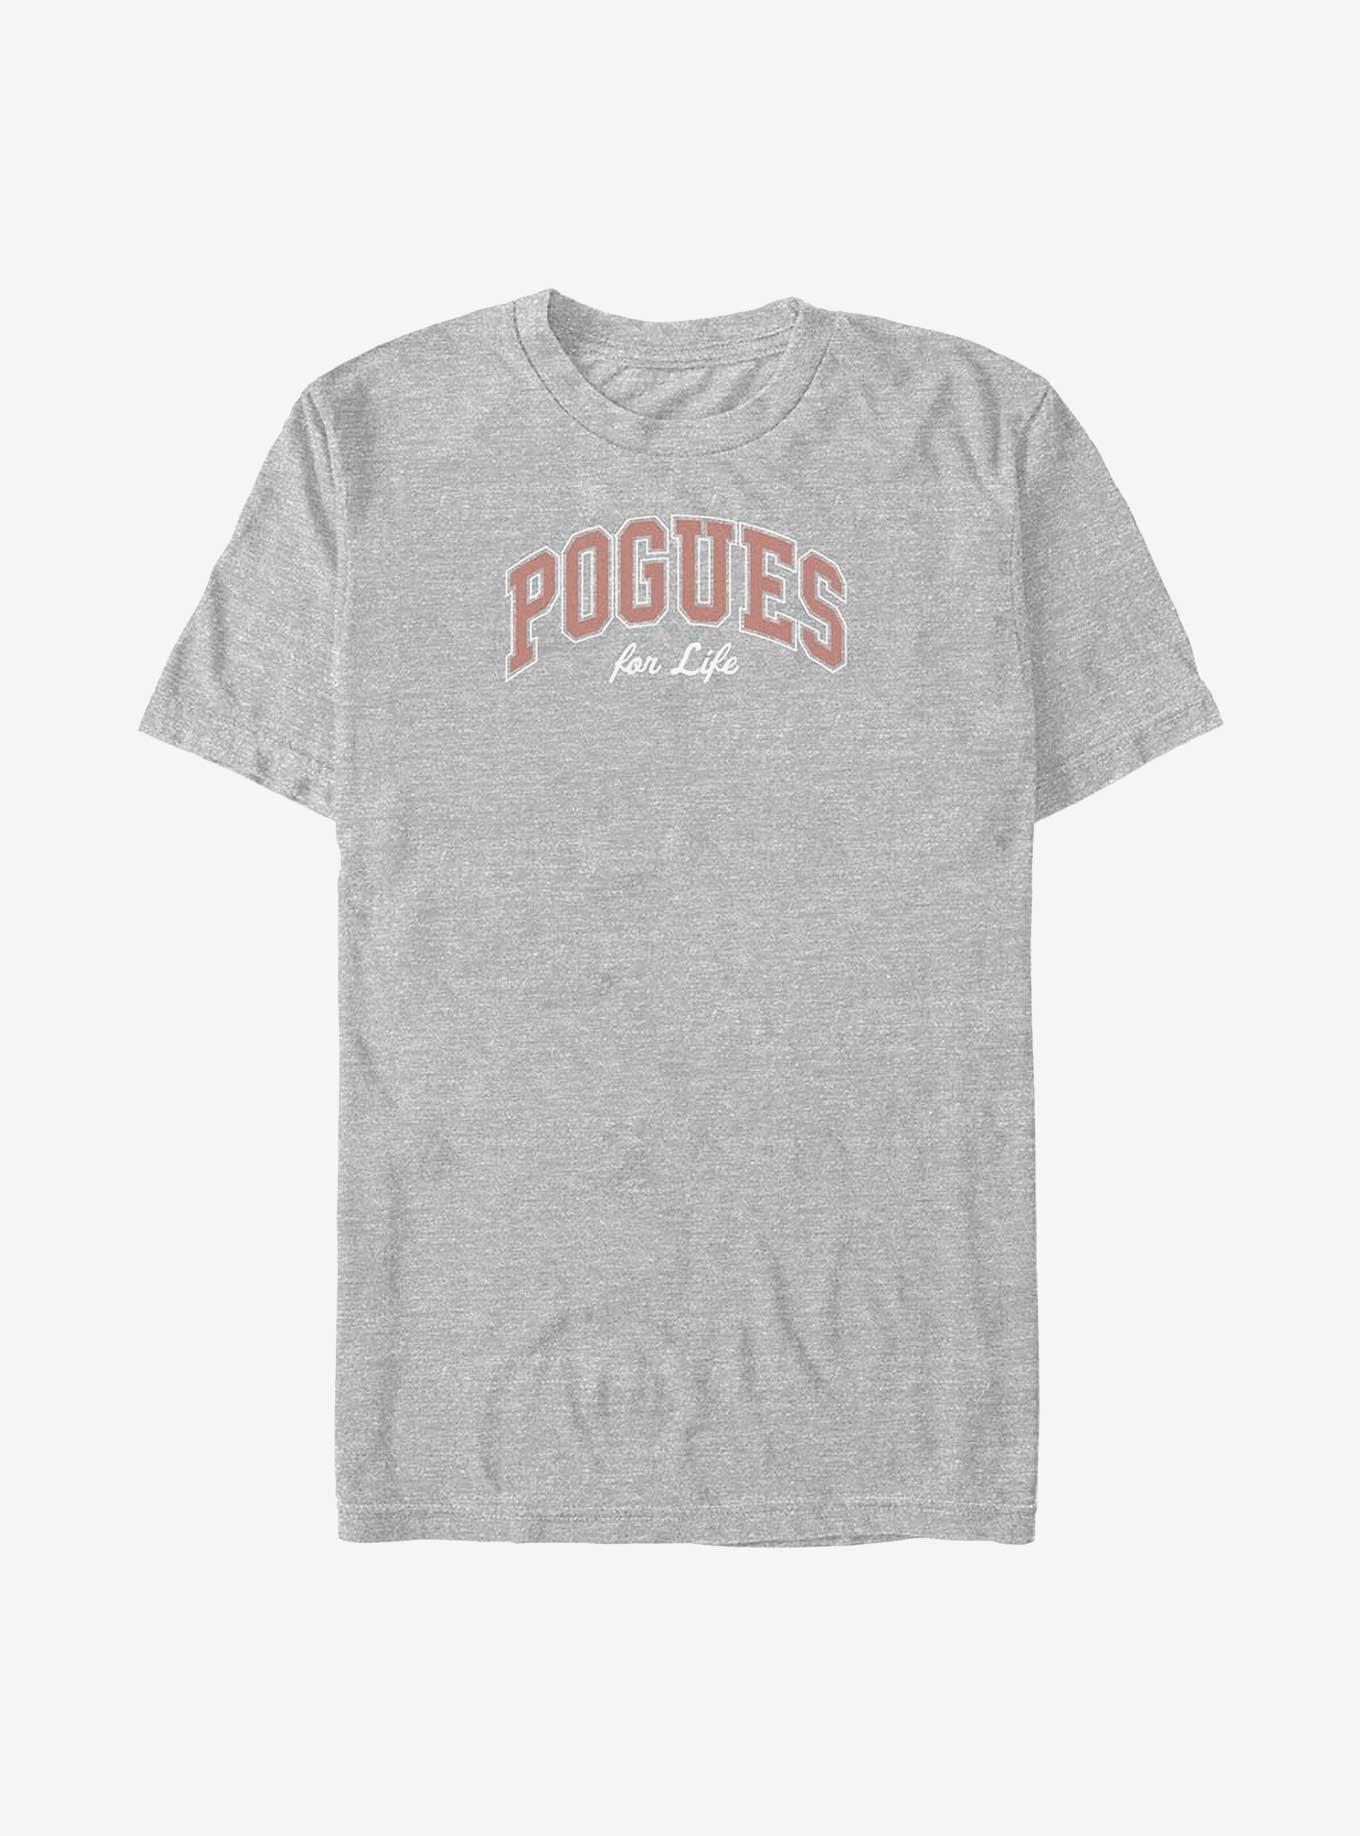 Outer Banks Pogues For Life T-Shirt, ATH HTR, hi-res